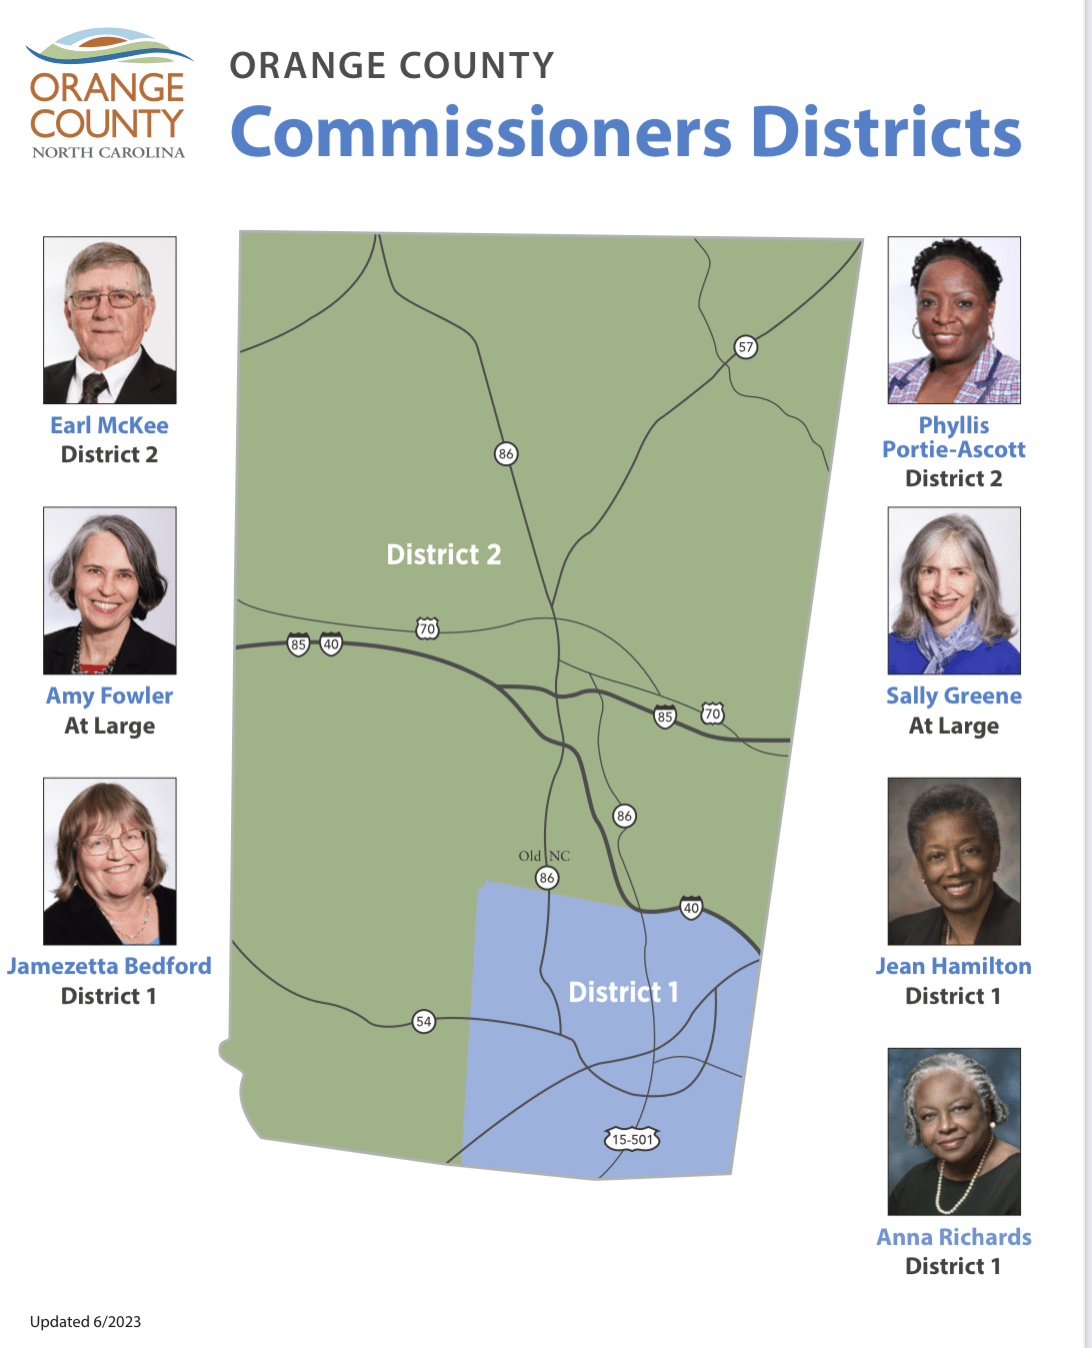 Will Orange County Have a Competitive March Primary for the County Commission races?